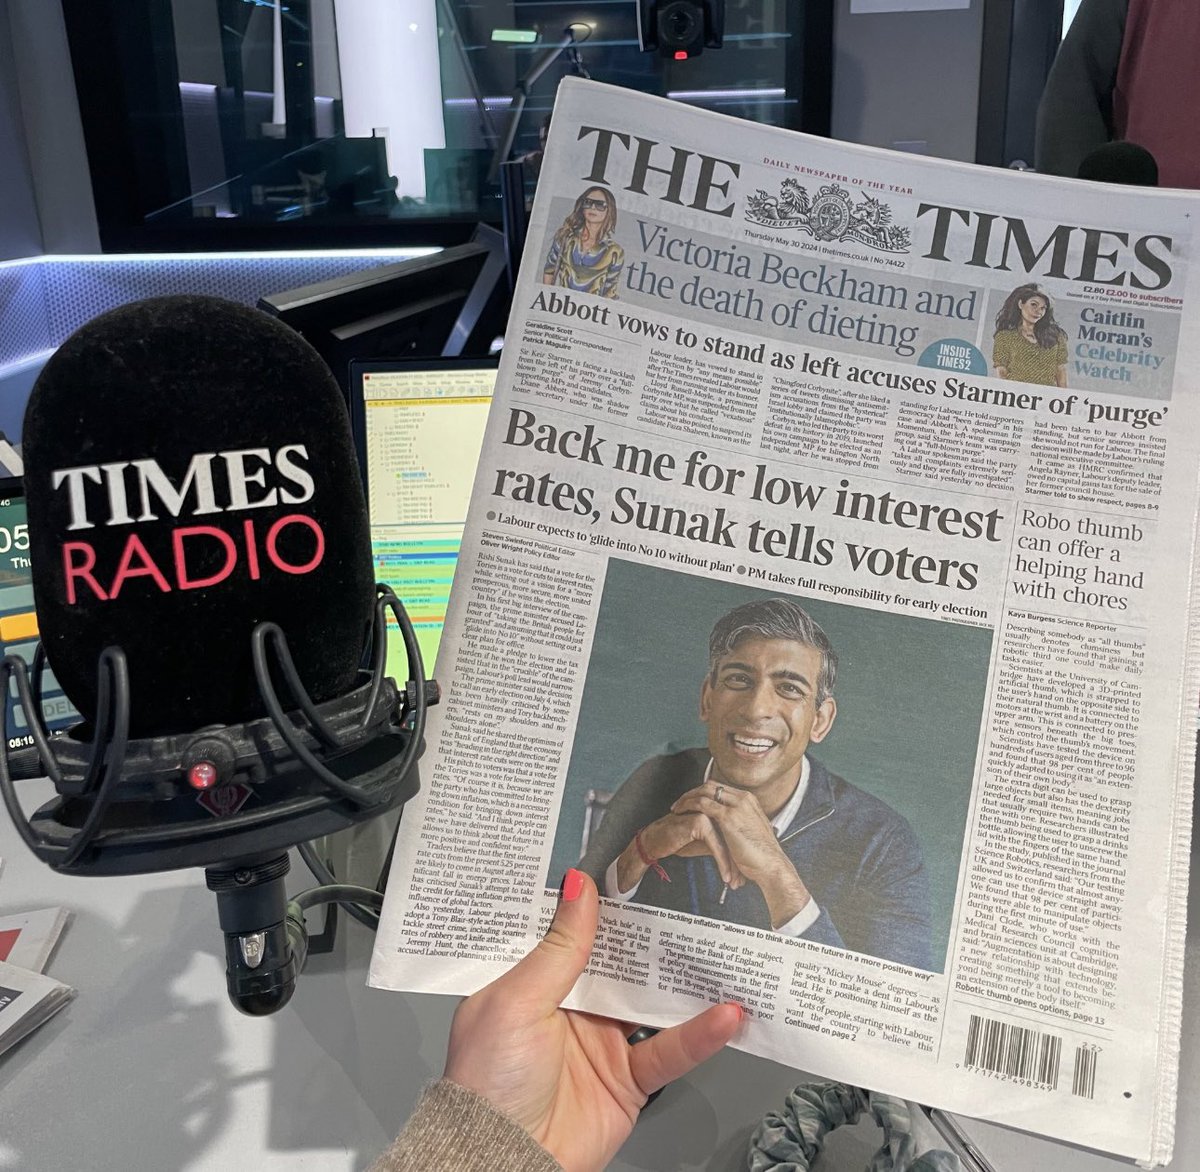 Going through the papers this morning with @rosiewright99. The Times on Sunak and interest rates. The Telegraph on Diane Abbott story. Guardian on the closure of the Evening Standard’s daily edition. (What, the Daily Mail isn’t leading with Angela Rayner’s vindication?)